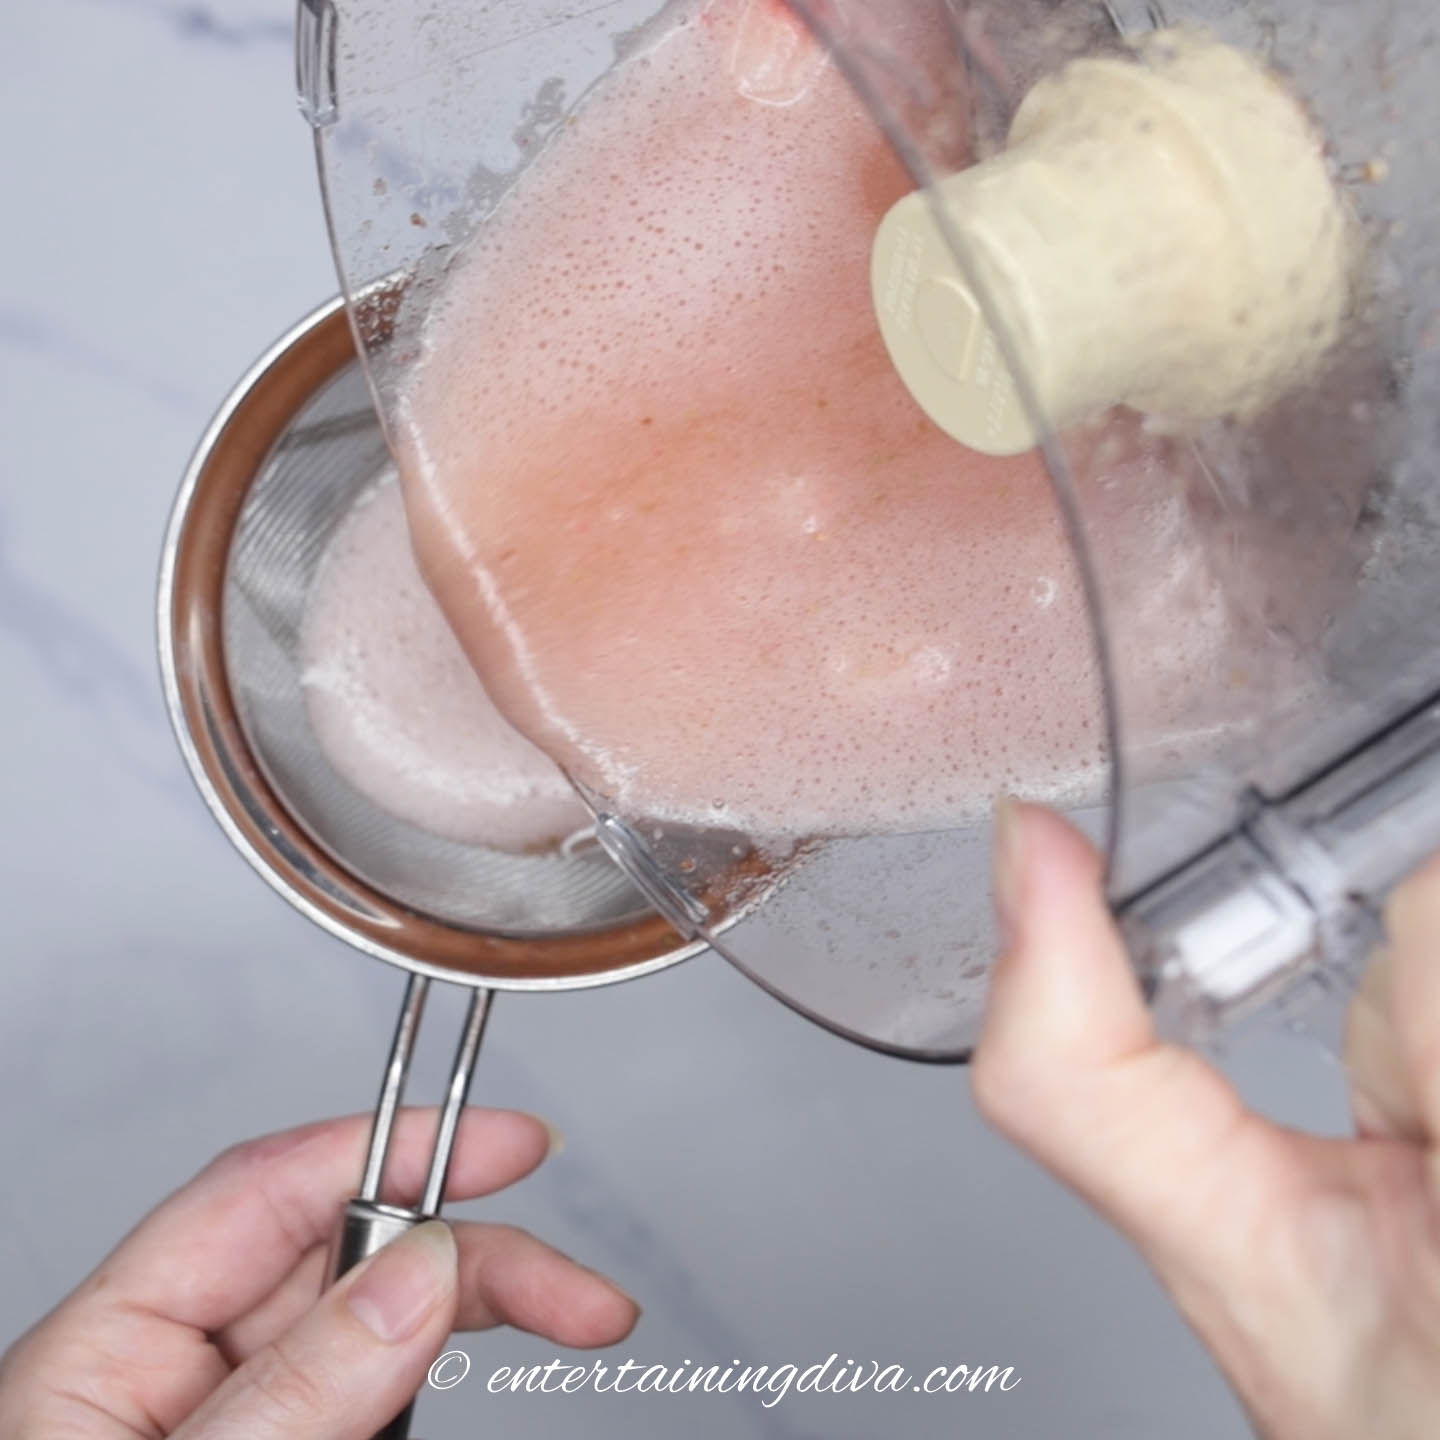 Strawberry and sparkling wine mixture being poured into a sieve